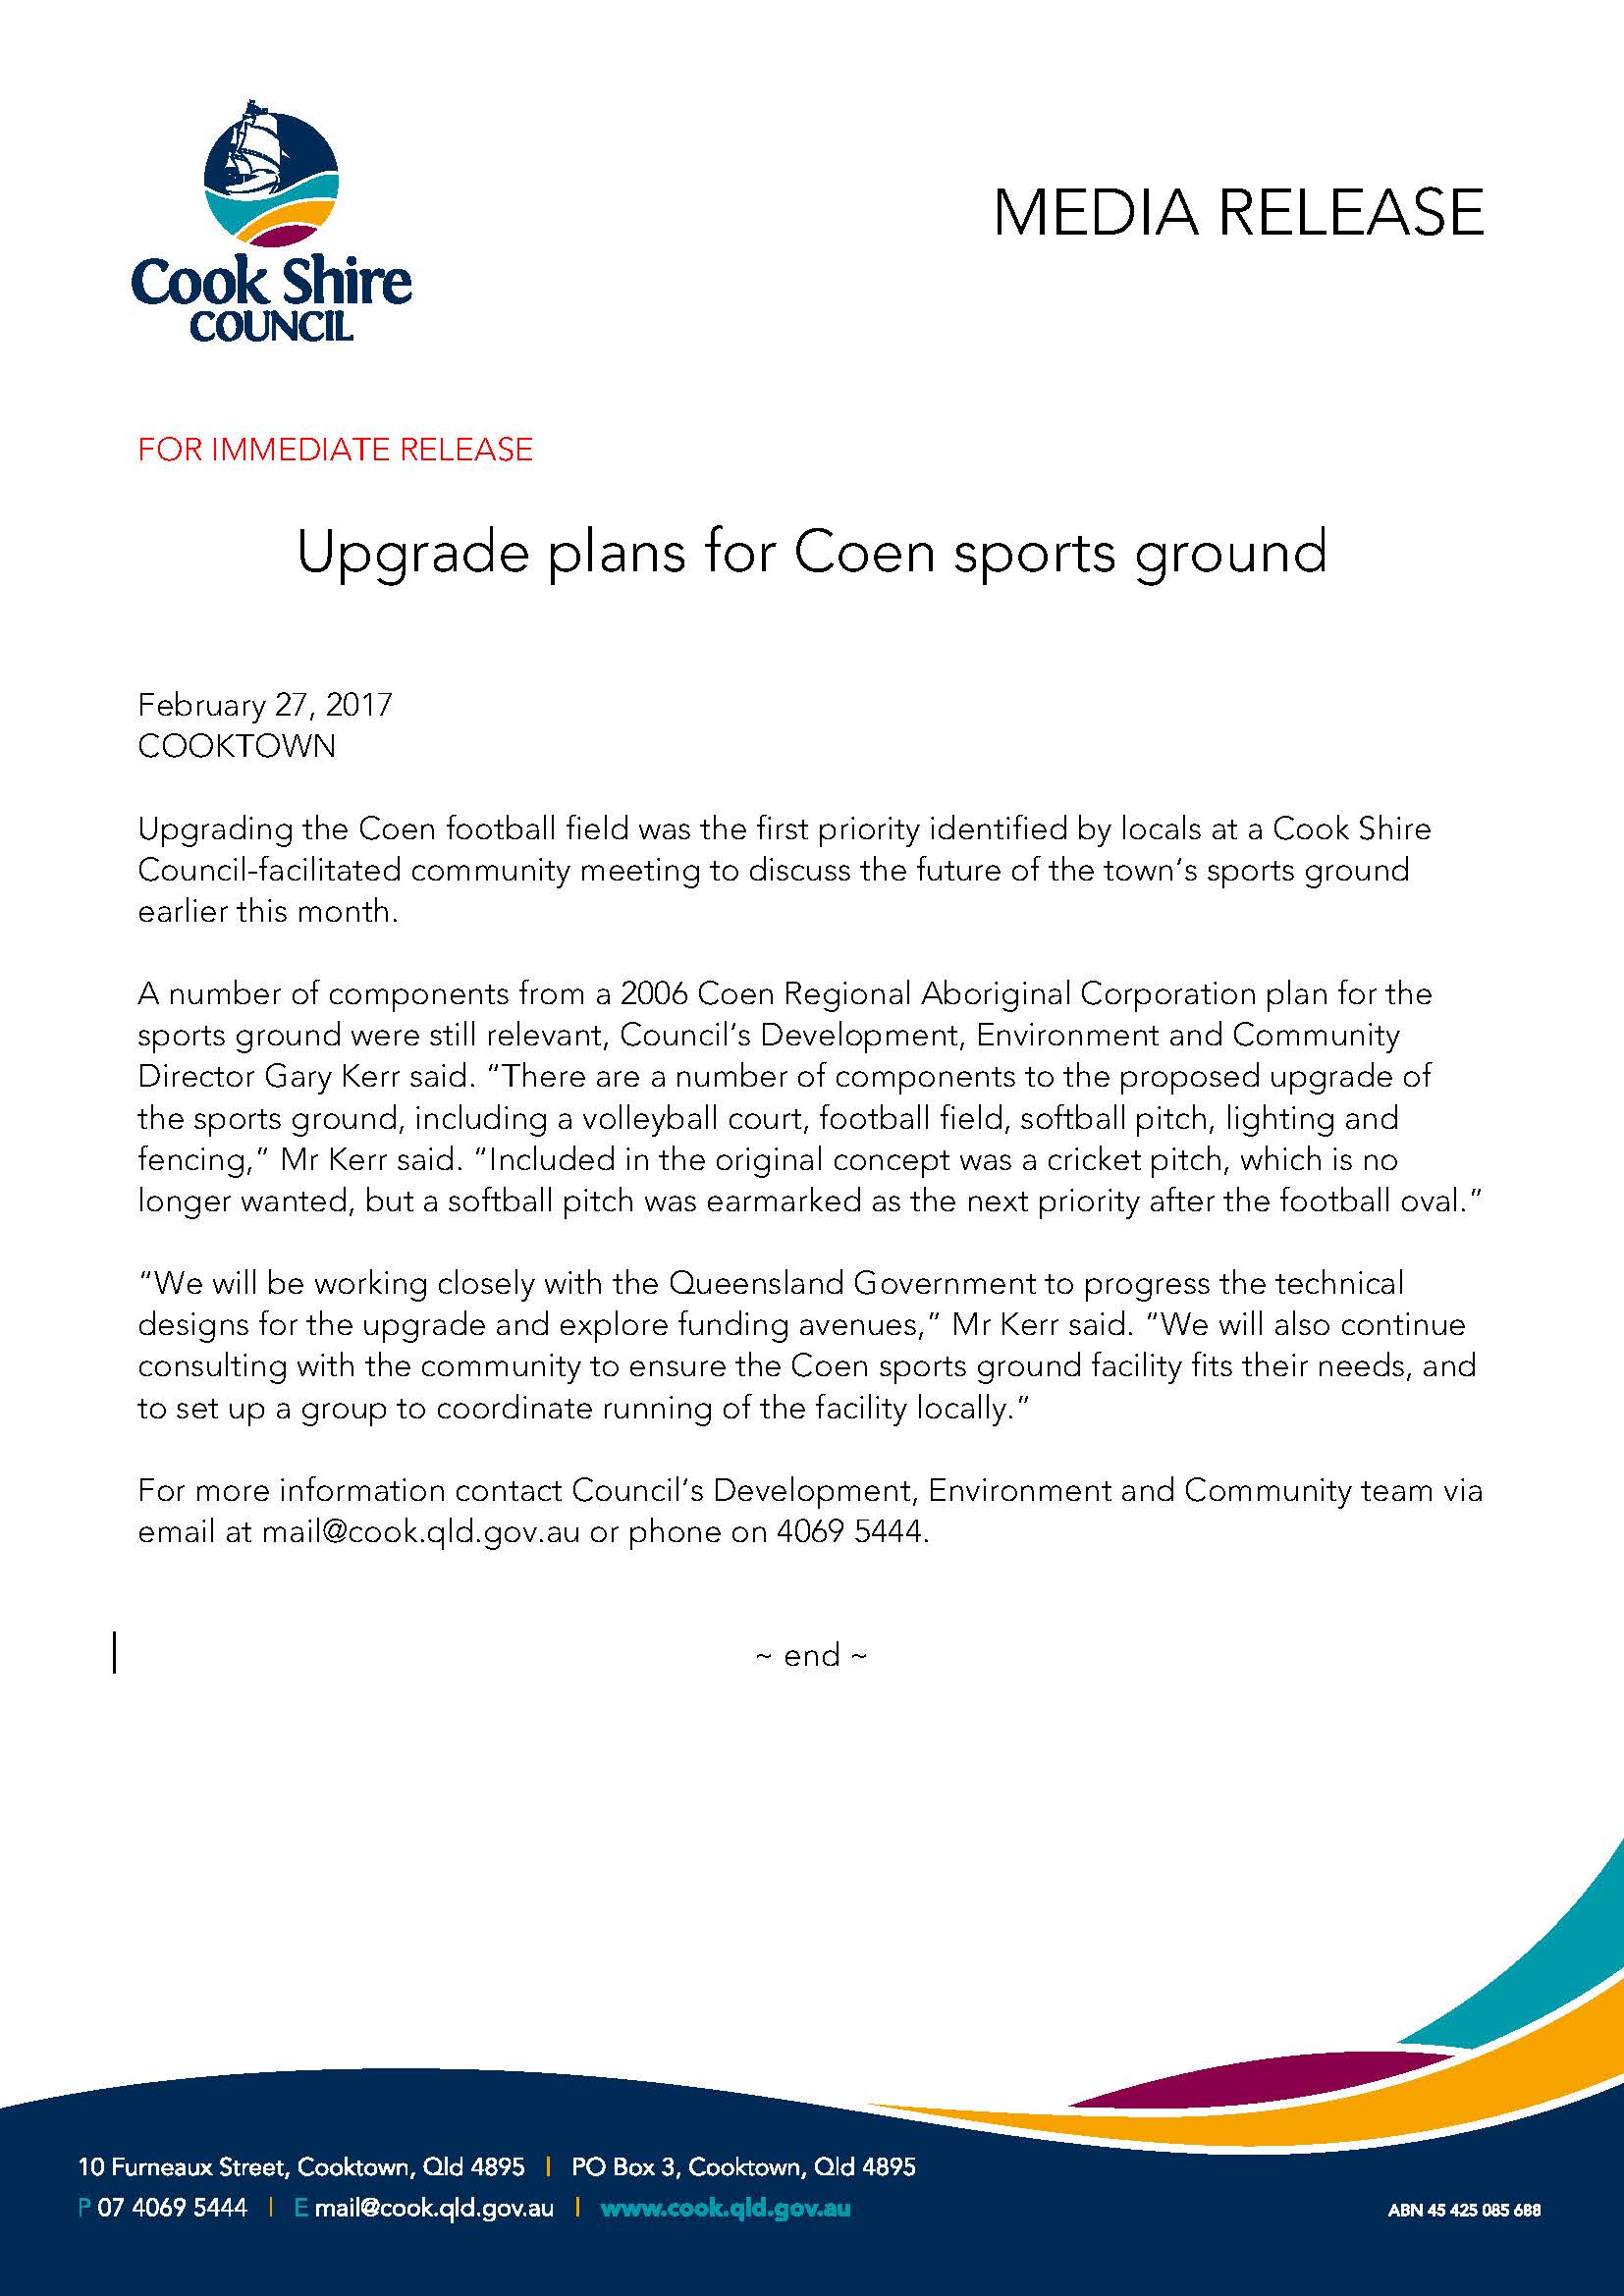 Upgrade plans for Coen sports ground